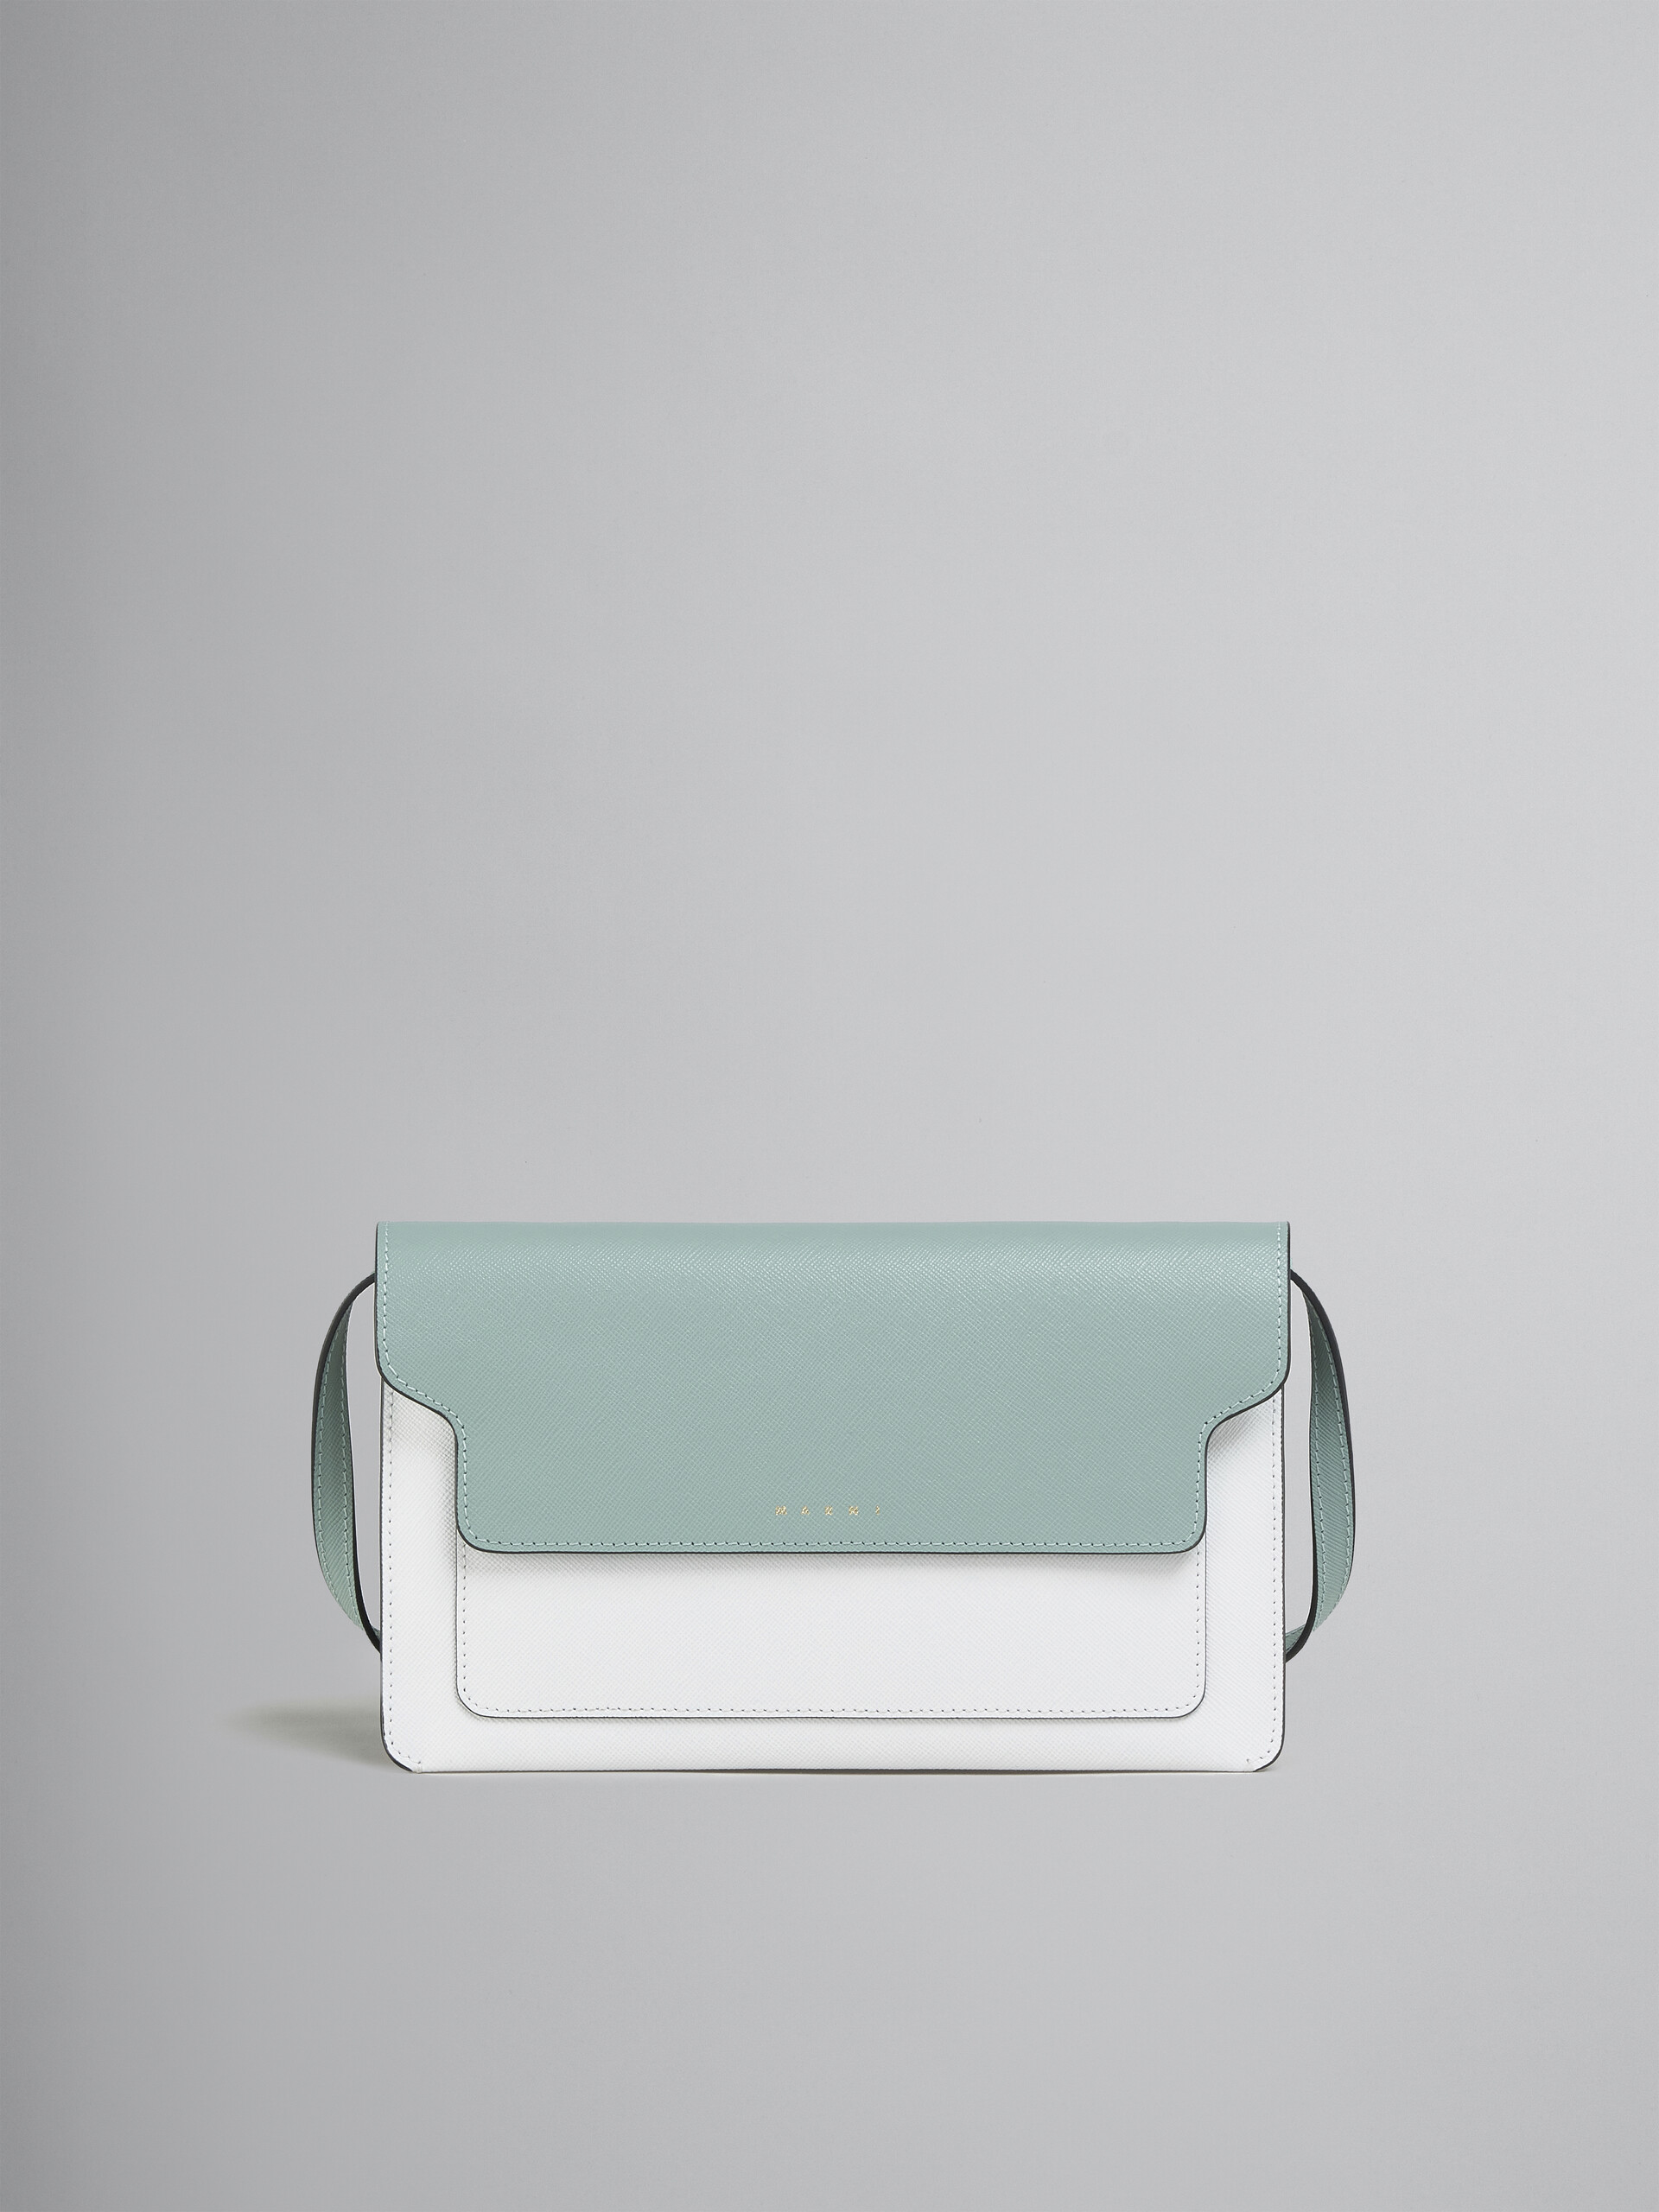 Trunk Clutch in light green white and brown saffiano leather - Pochette - Image 1